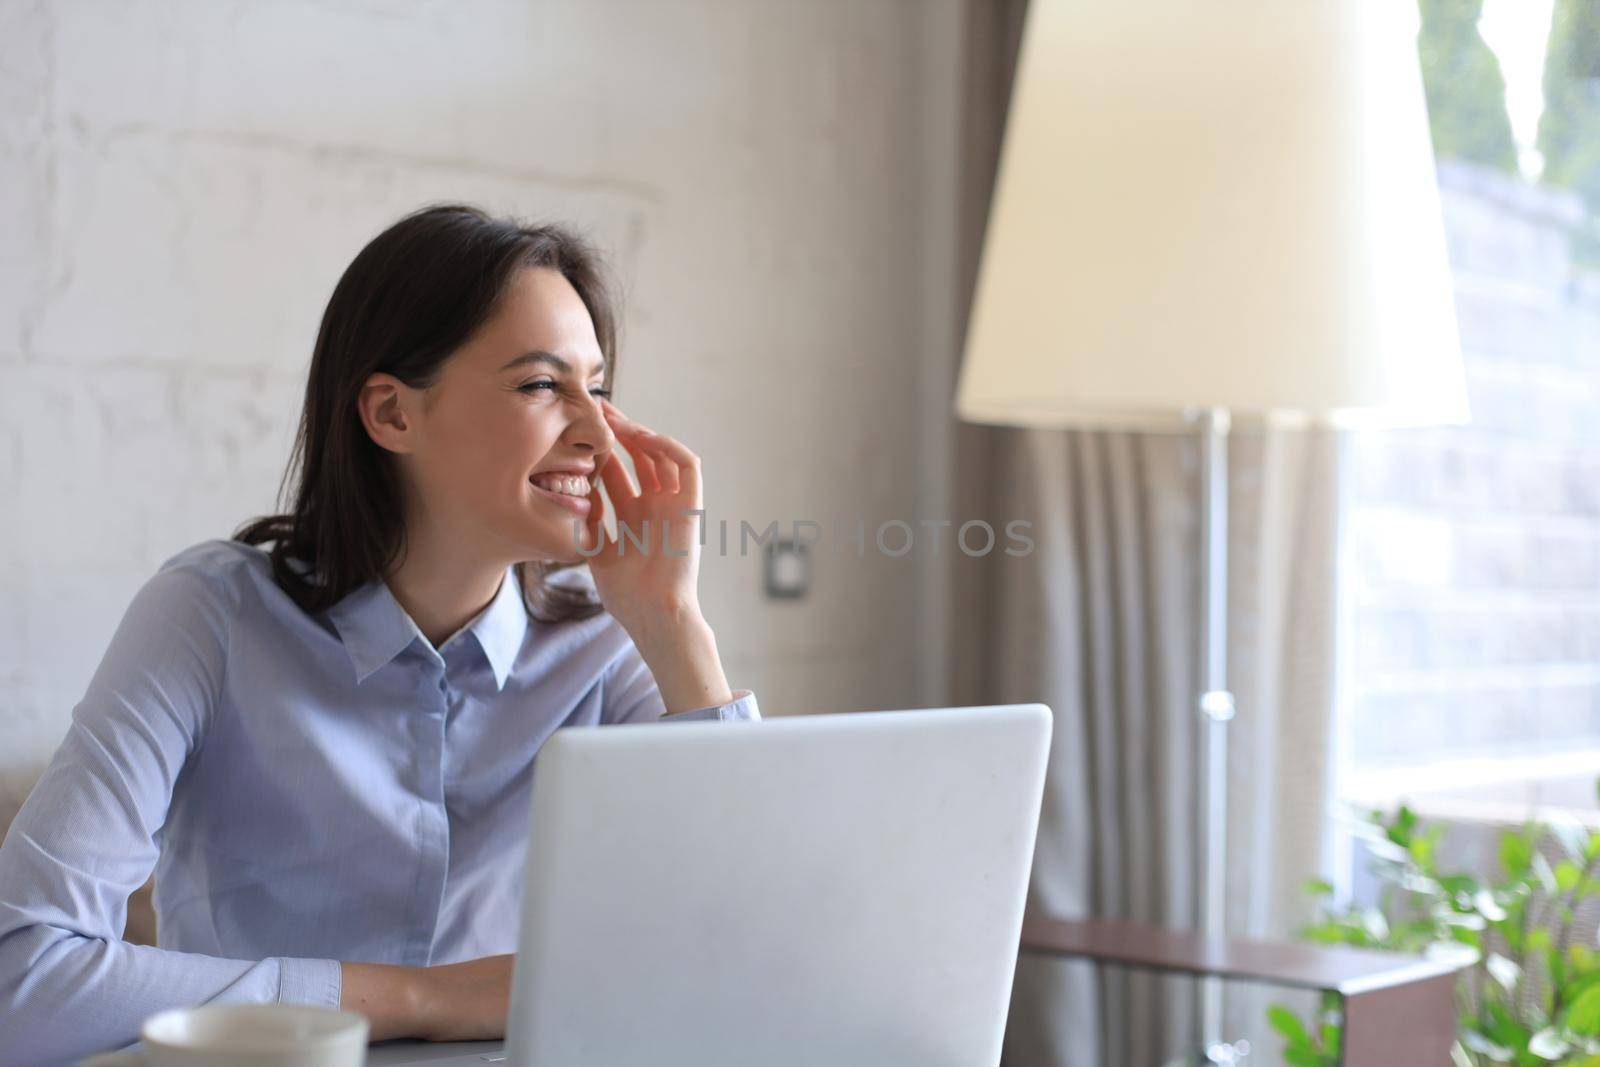 Confident young businesswoman with a friendly smile sitting at her desk in a home office